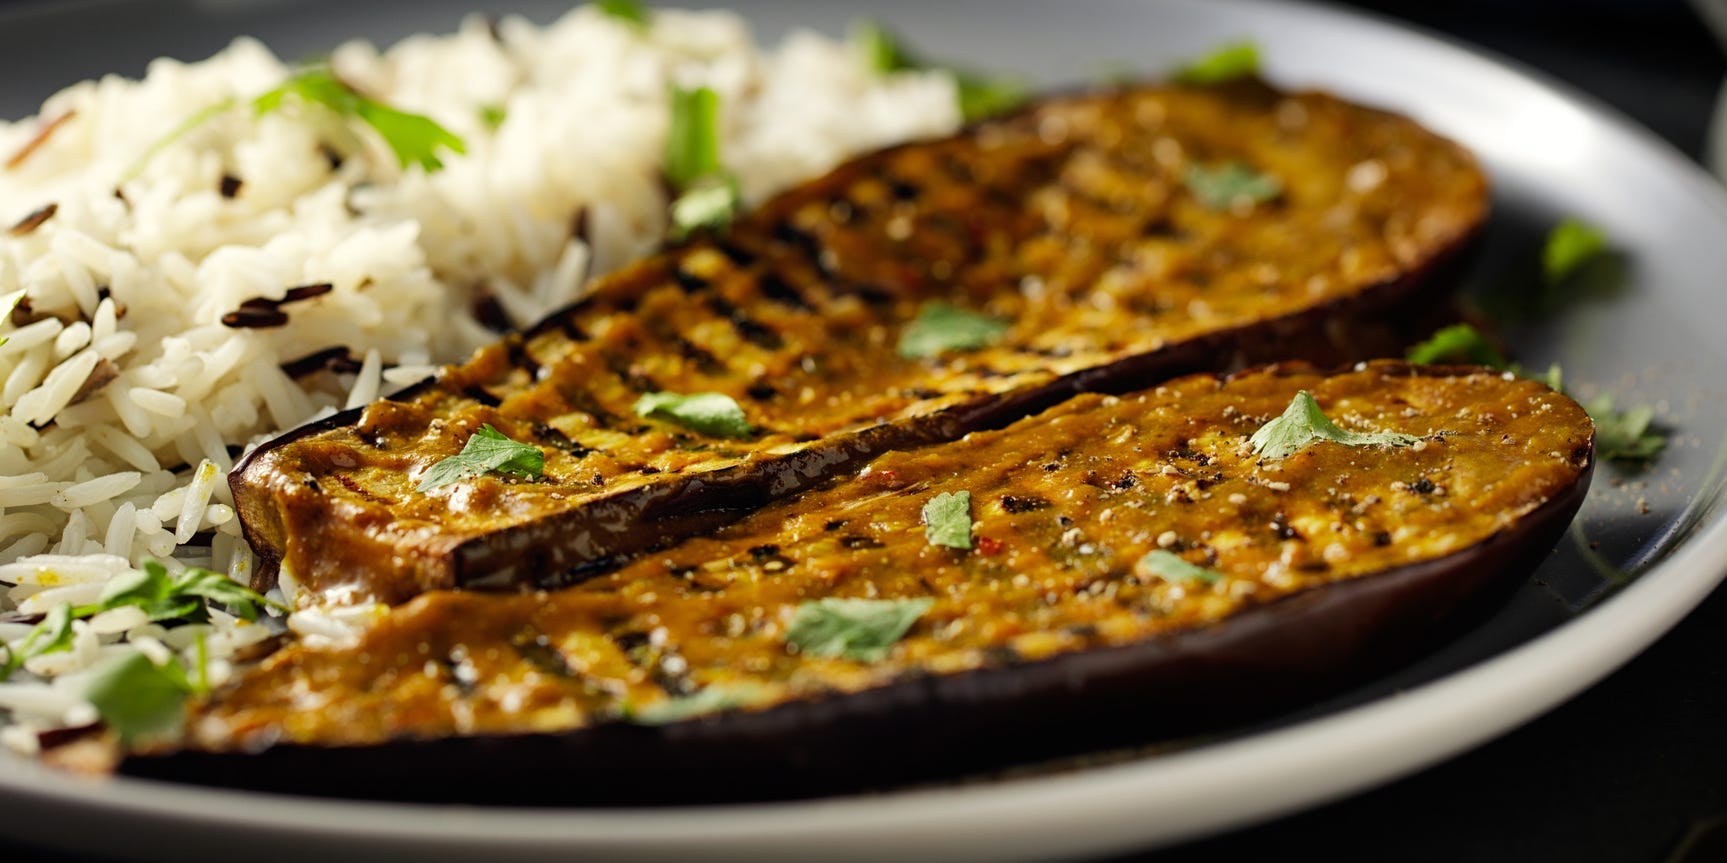 Grilled eggplant with a side of rice